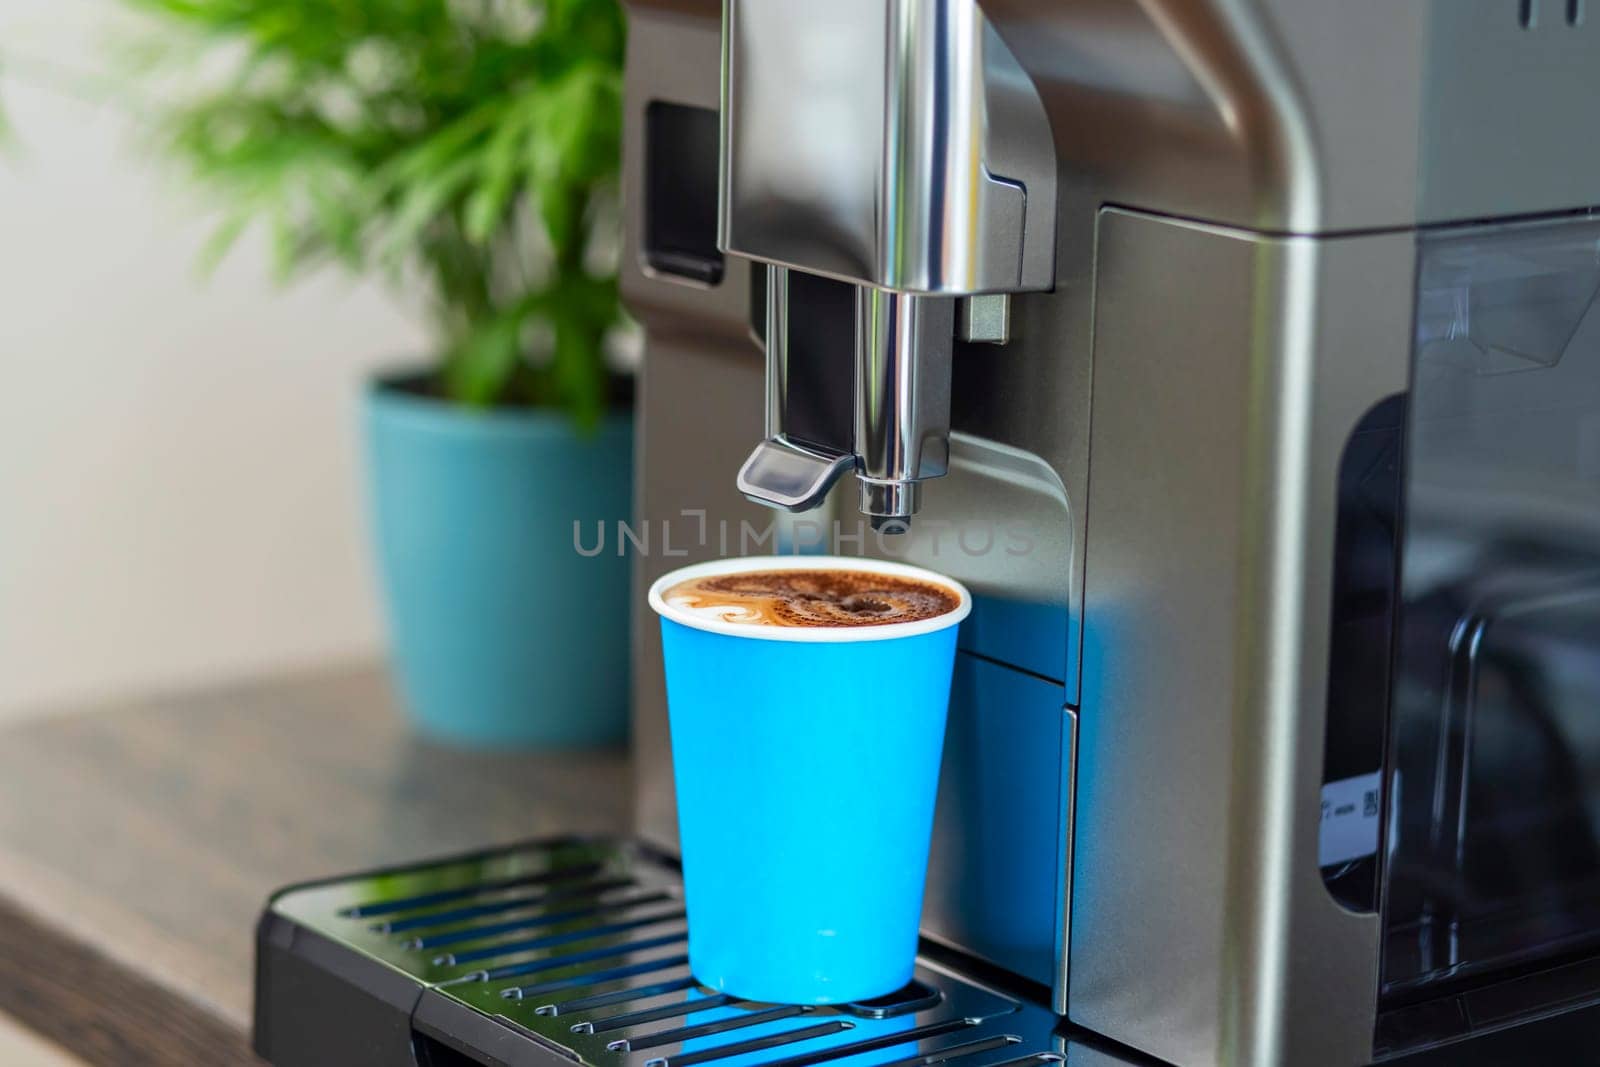 Automatic Coffee Machine Dispensing Espresso into Cup by andreyz